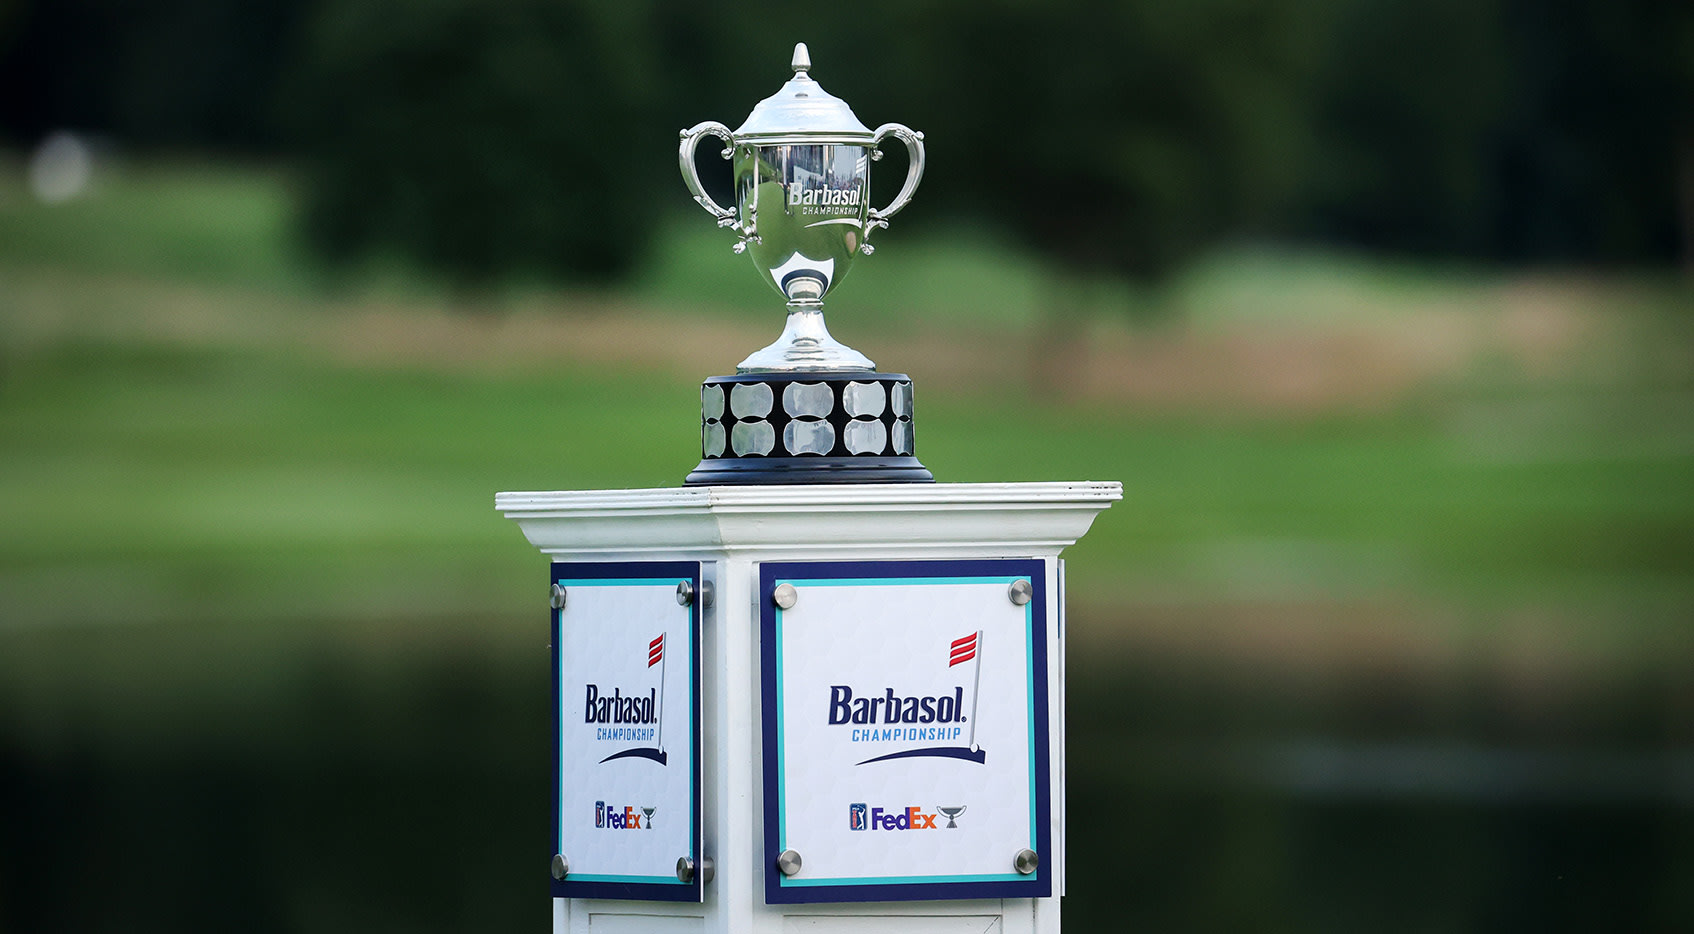 How to Watch the Barbasol Championship, Round 1 Featured Groups, live scores, tee times, TV times